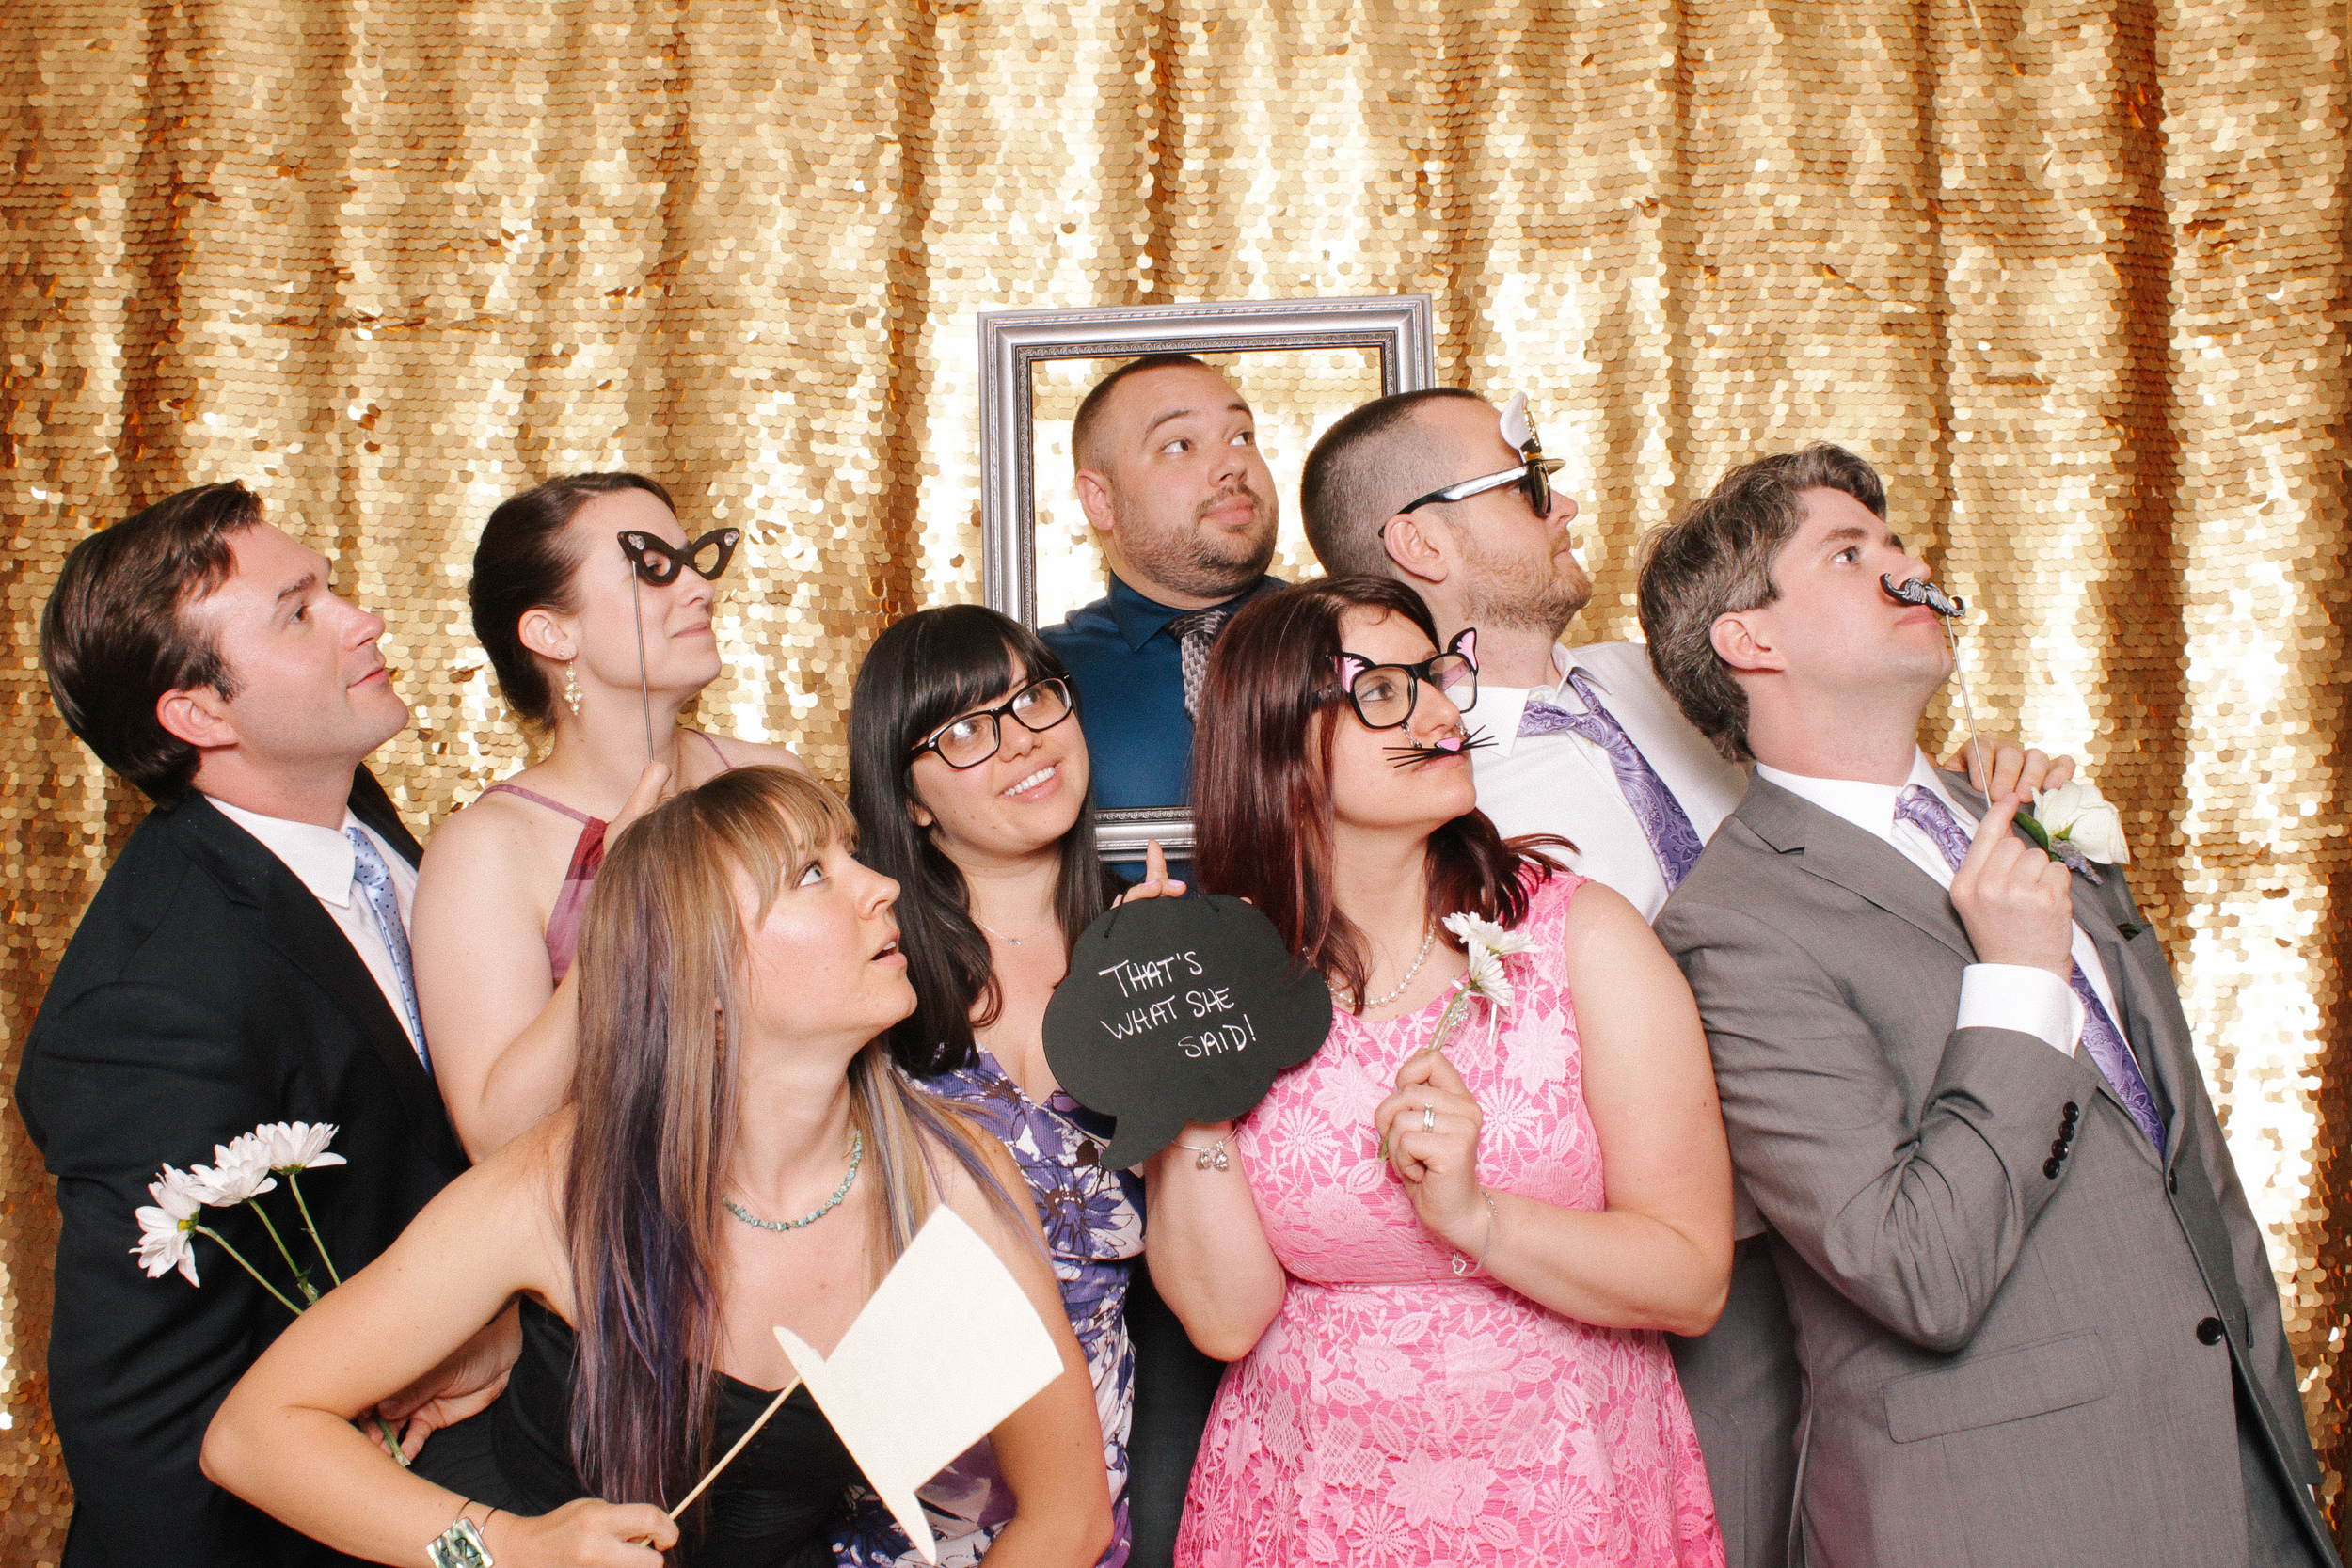 00032-Photo Booth at the Cleveland Botanical Garden Alys and Brad-20150606.jpg